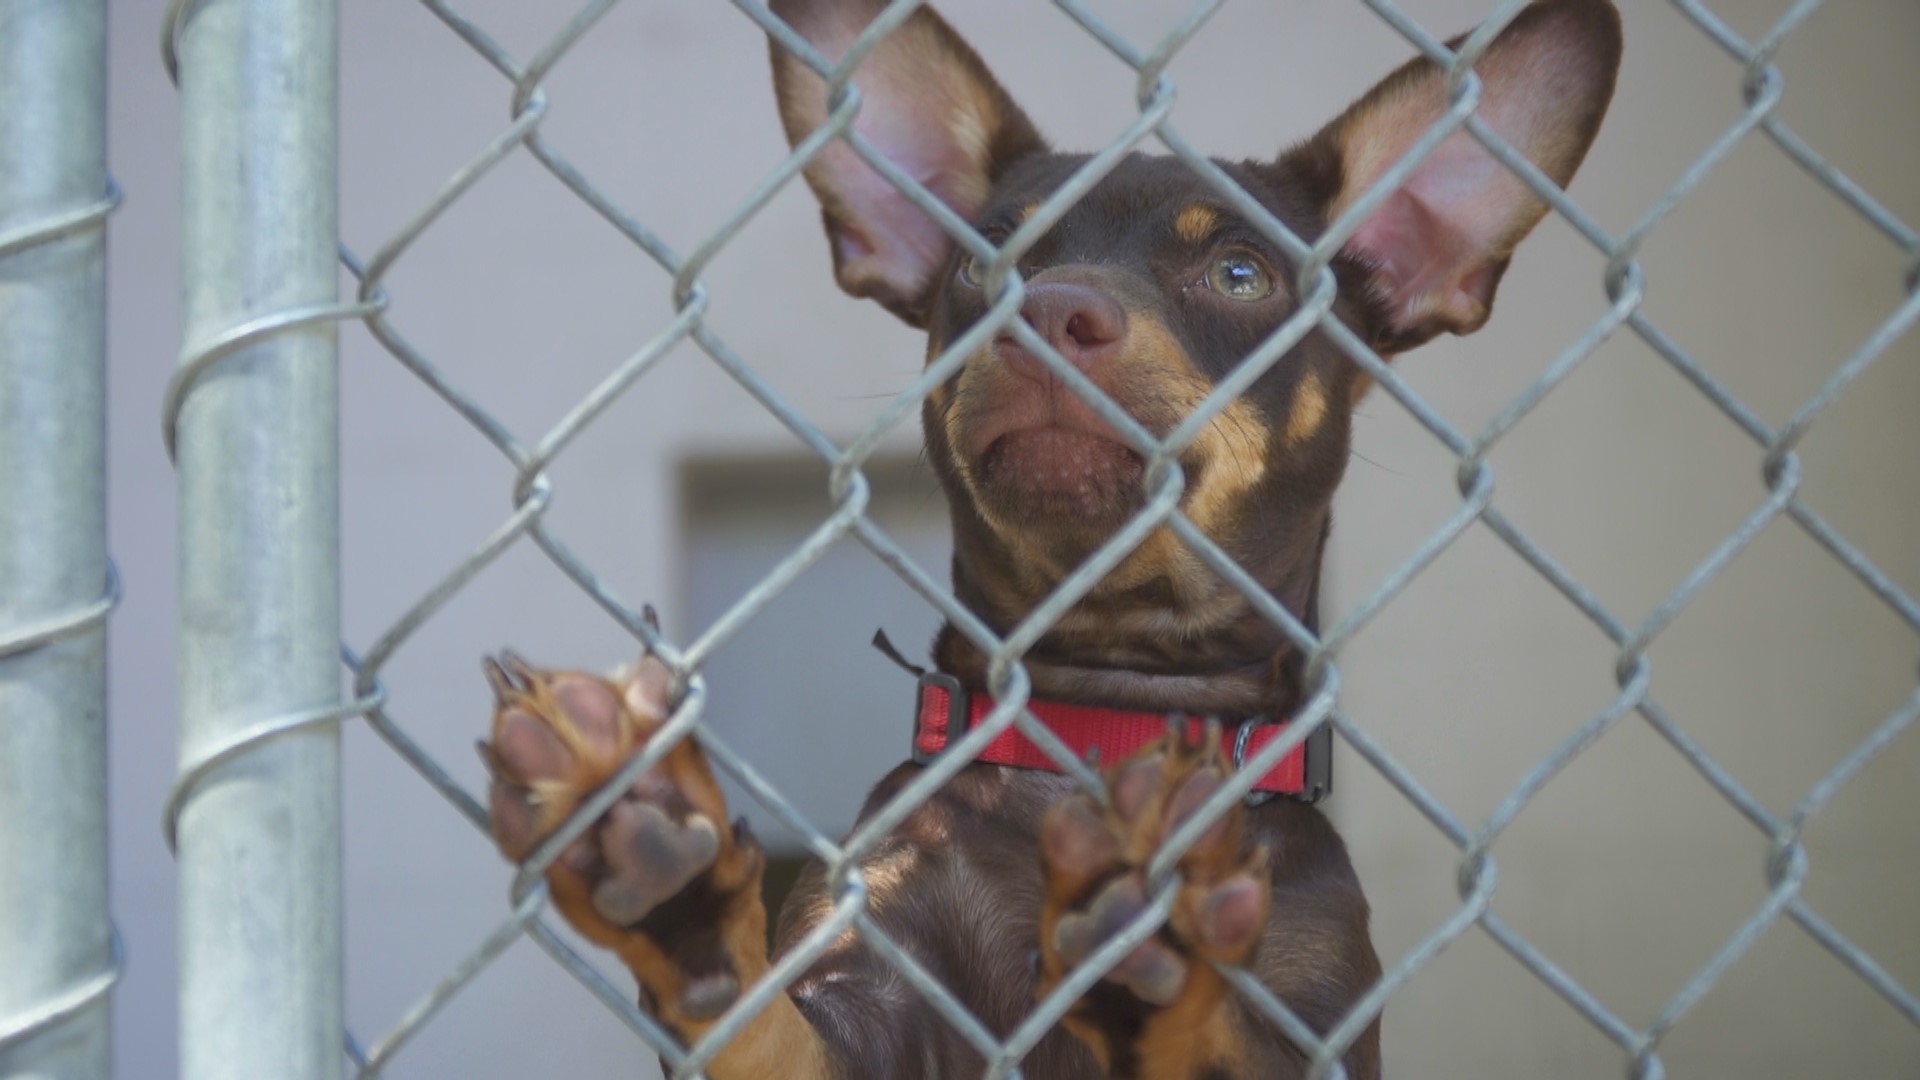 California’s new budget for 2019-2020 includes $5 million in funding for animal care and other pet-related needs for the state’s homeless population.